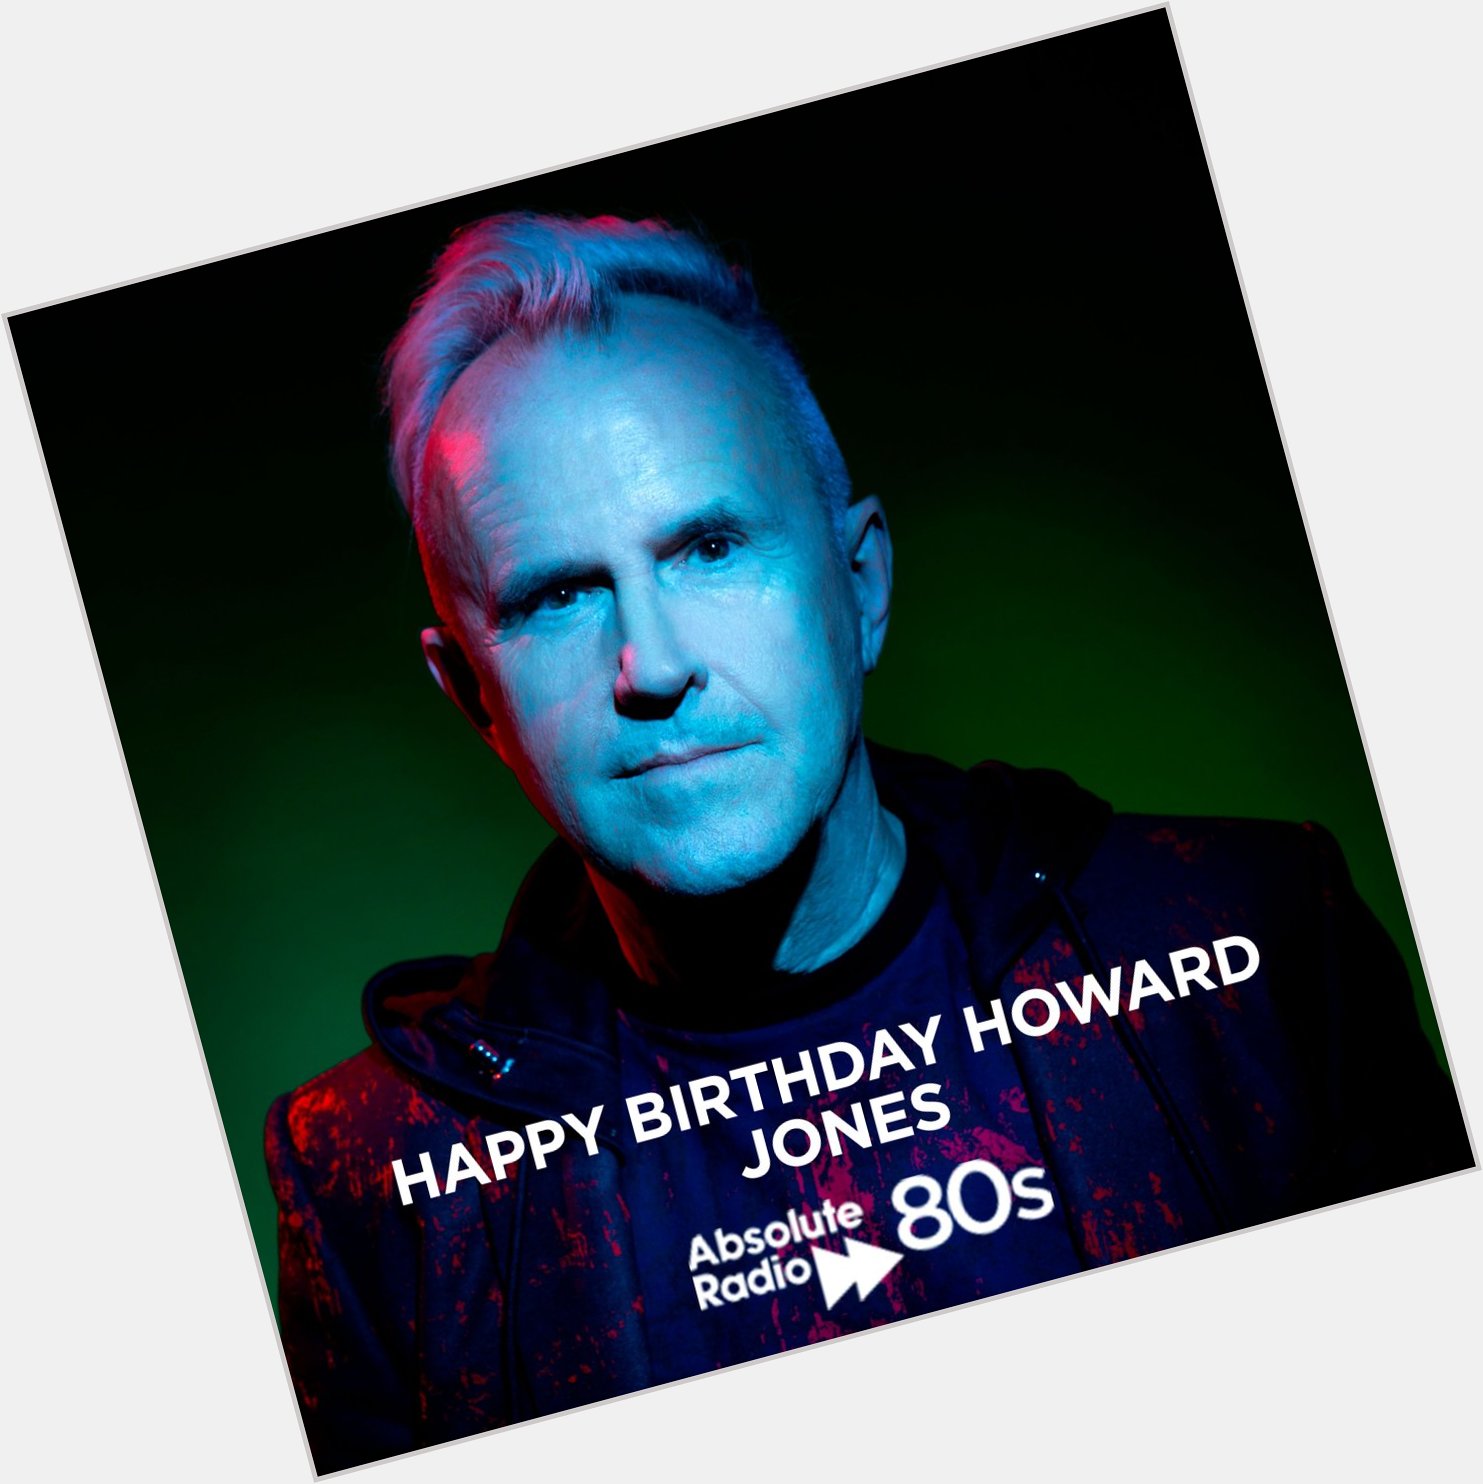 A very Happy Birthday to Mr Howard Jones from everyone at 